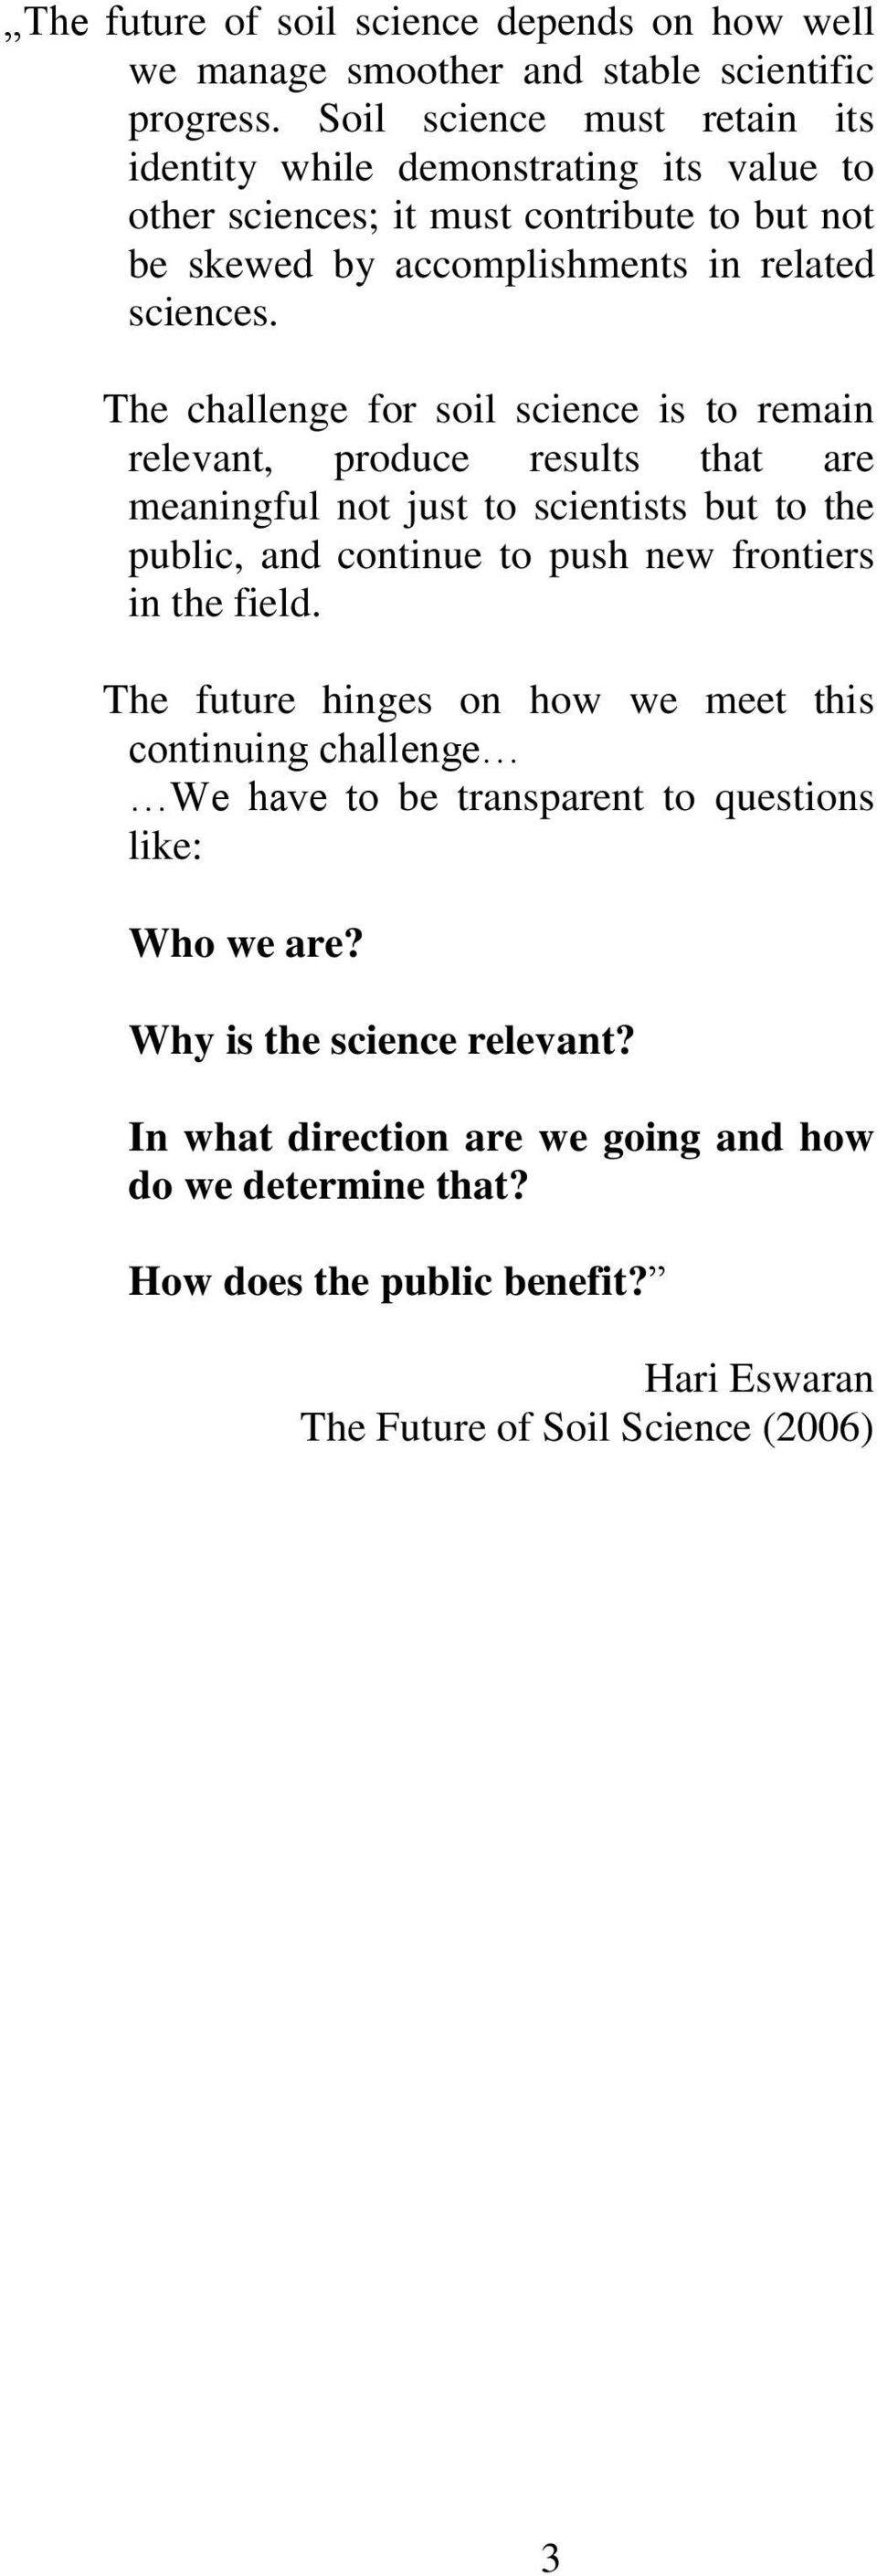 The challenge for soil science is to remain relevant, produce results that are meaningful not just to scientists but to the public, and continue to push new frontiers in the field.